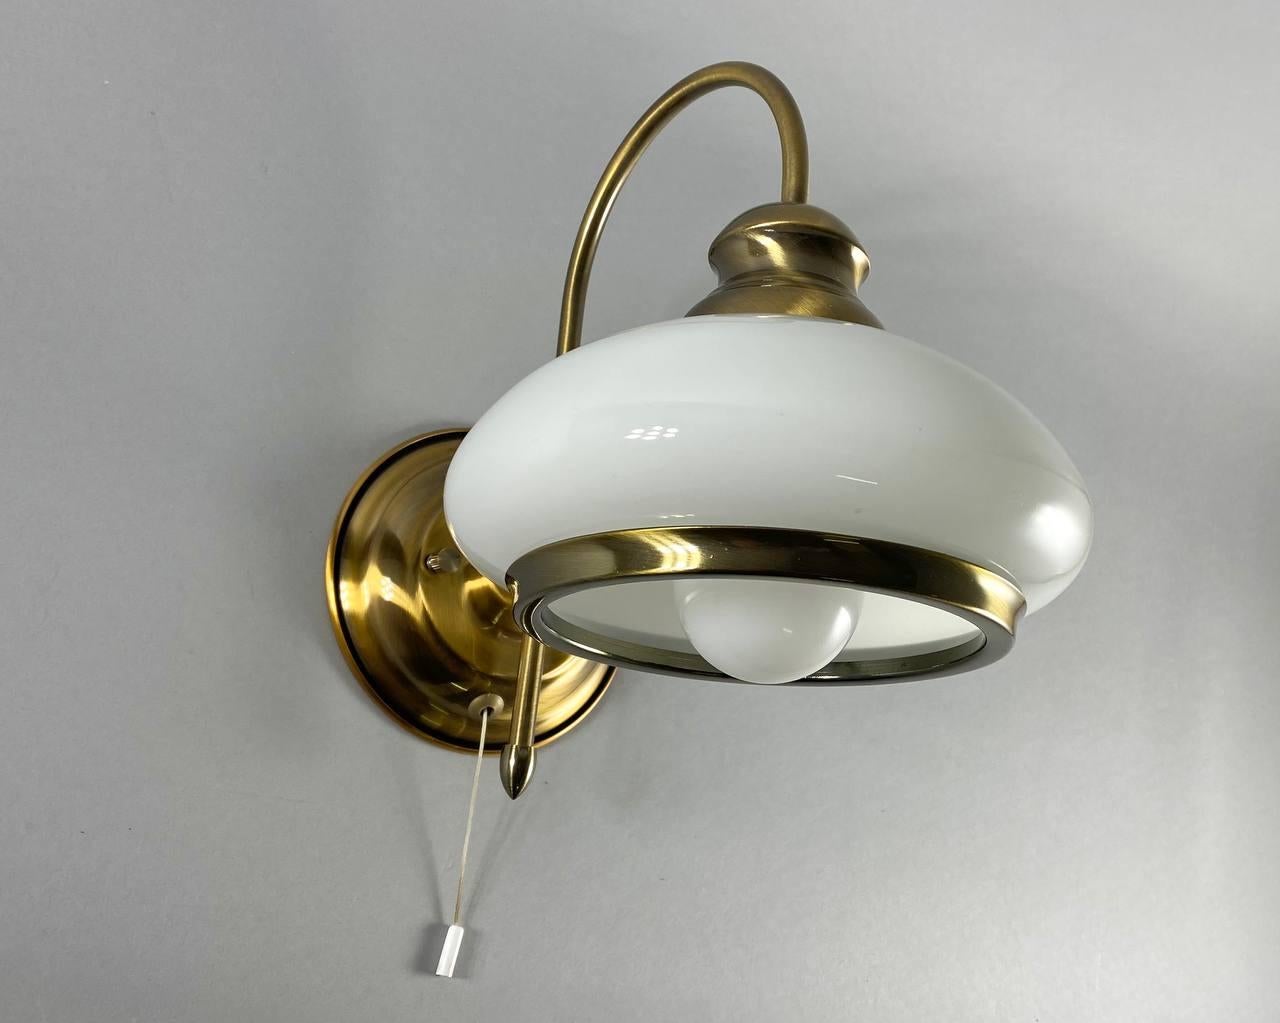 Vintage wall lamp - is executed in classical style. Metal body -bronze color. Glass shade, glossy with metal edging.

 Stylish wall lamp by Shunda Lighting, China.

 The high strength and reliability of the Luminaire is due to the use of high